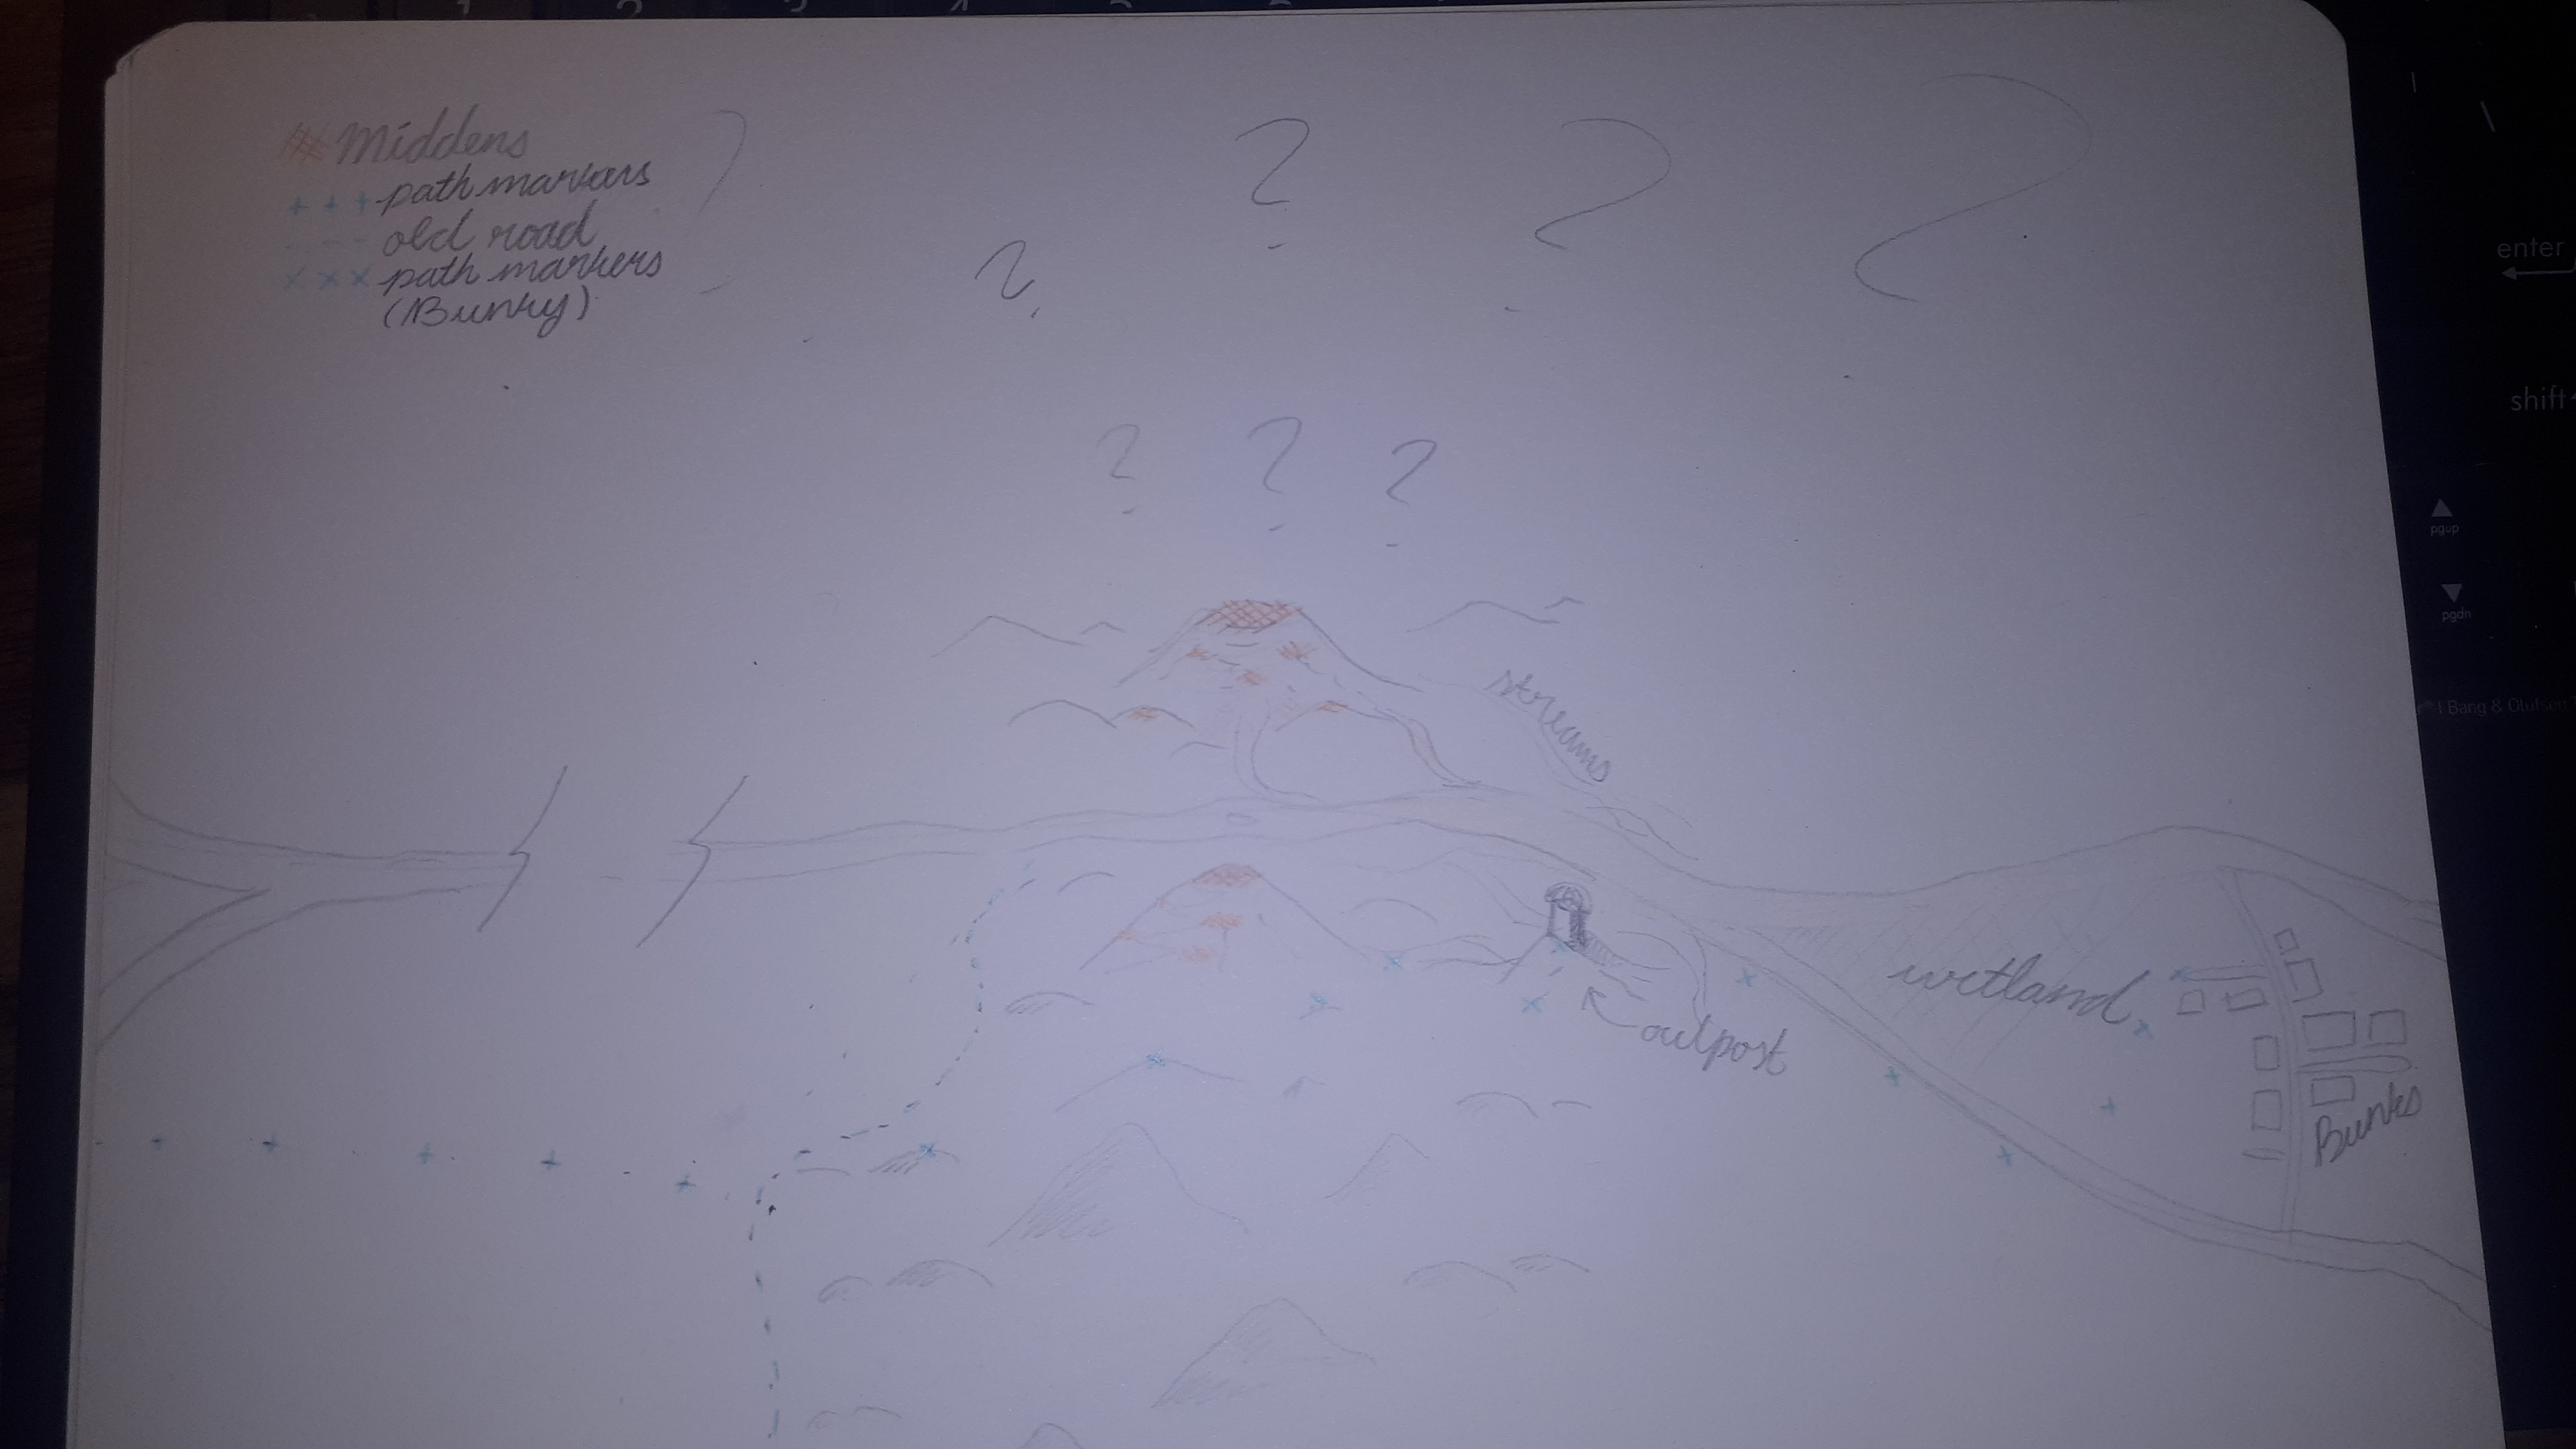 A map of two mountain ranges with orange at their tops, paths going into them from the left, and out at the right, leading to an outpost, and further still some buildings labelled "Bunks." (Please DM me if you would like more detail)